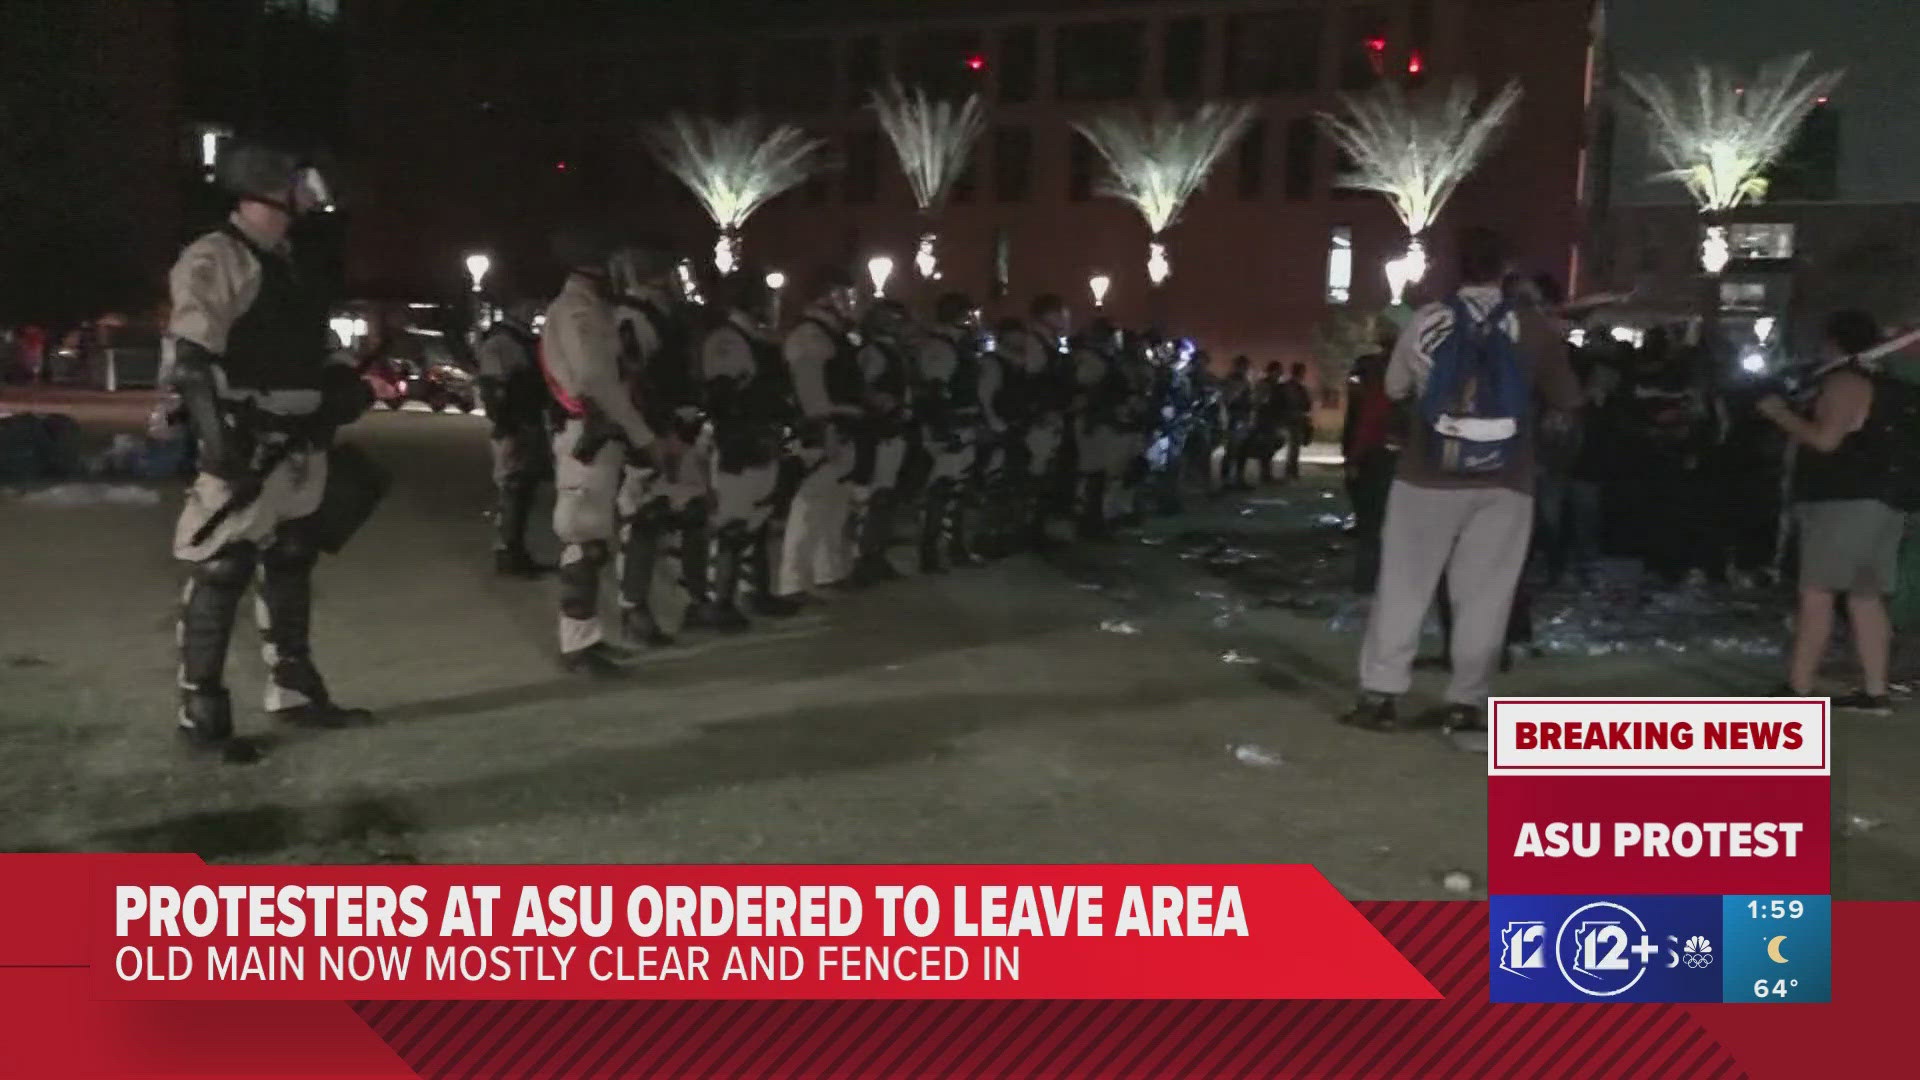 Arizona law enforcement declared a protest at ASU an unlawful assembly, marched in, broke it up and took many people into custody. Here is a recap of what happened.